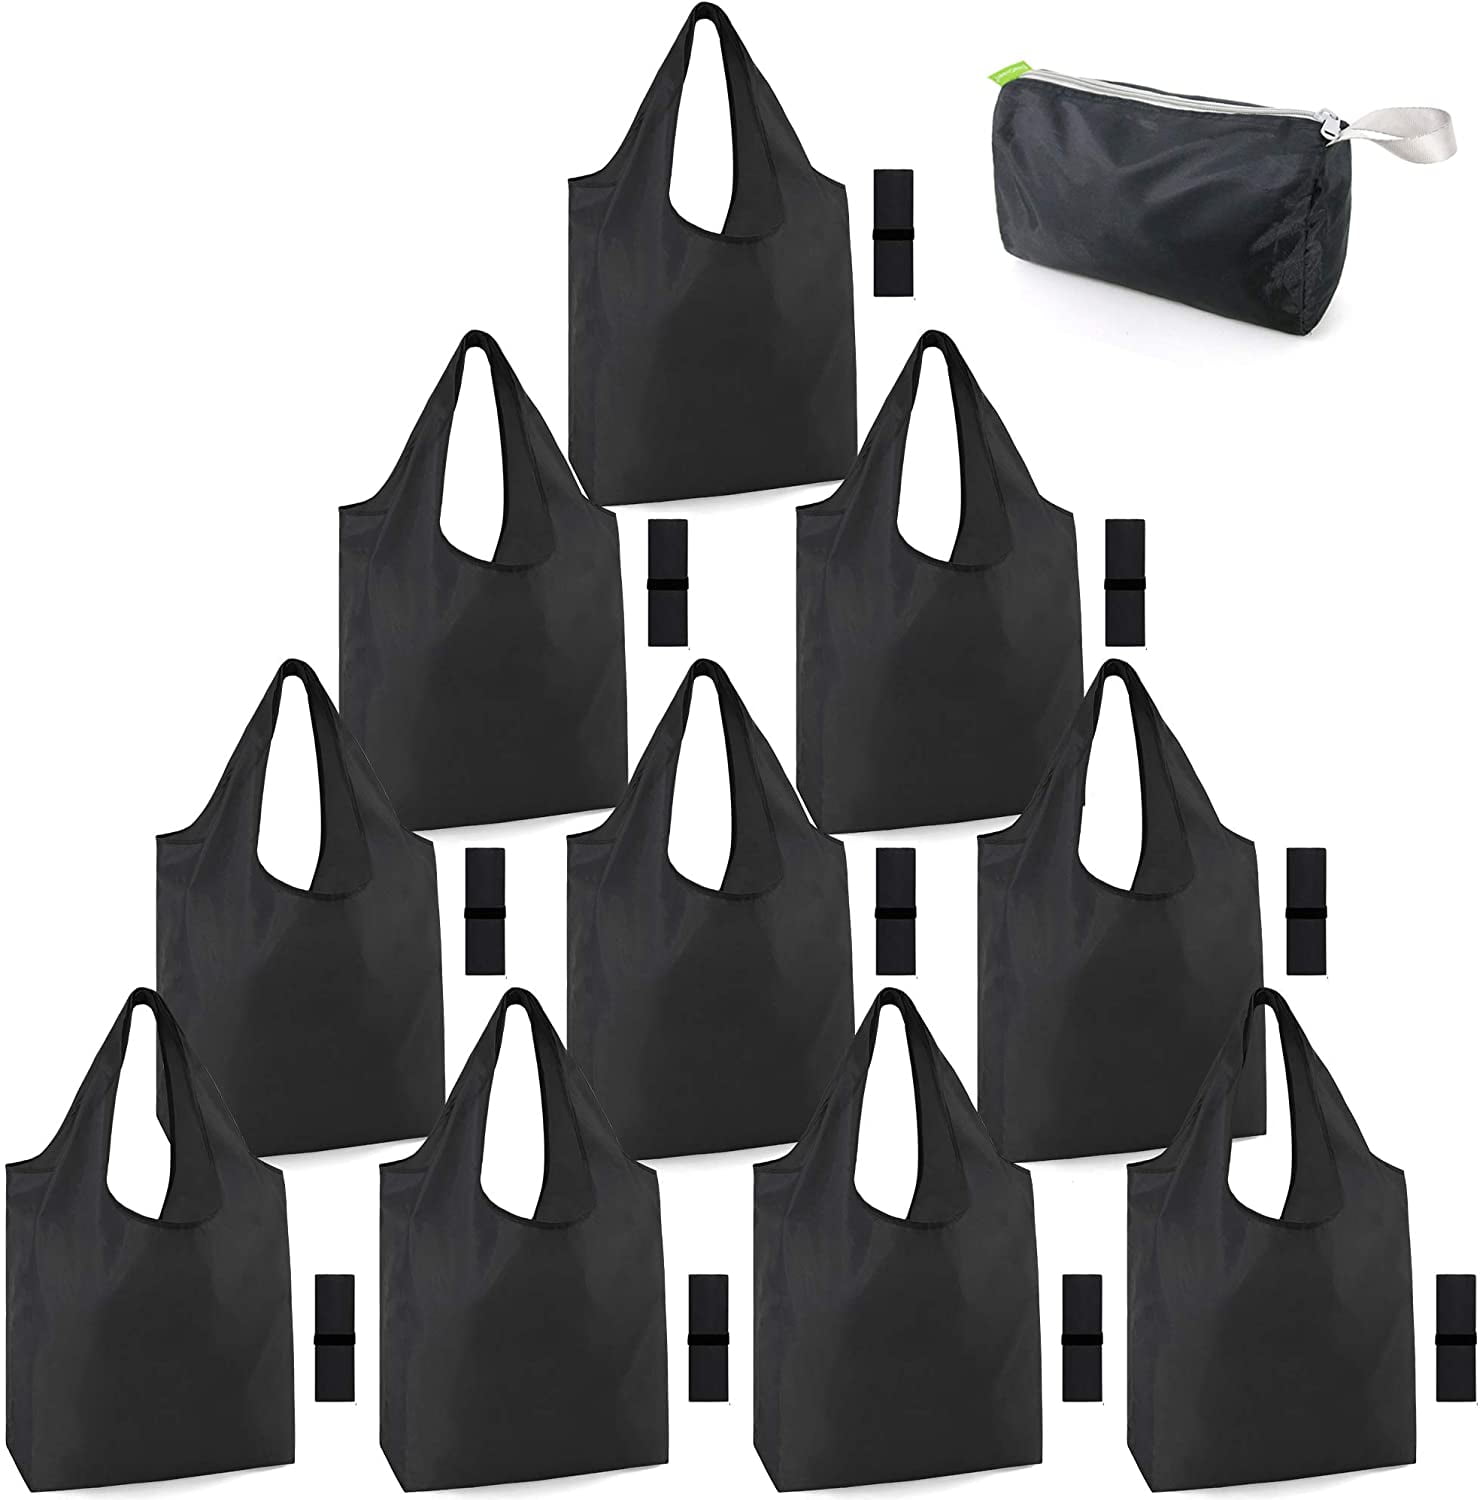 Reusable-Grocery-Bags-Shopping-Foldable-Bags for Groceries 10 Pack Xlarge Bags w 